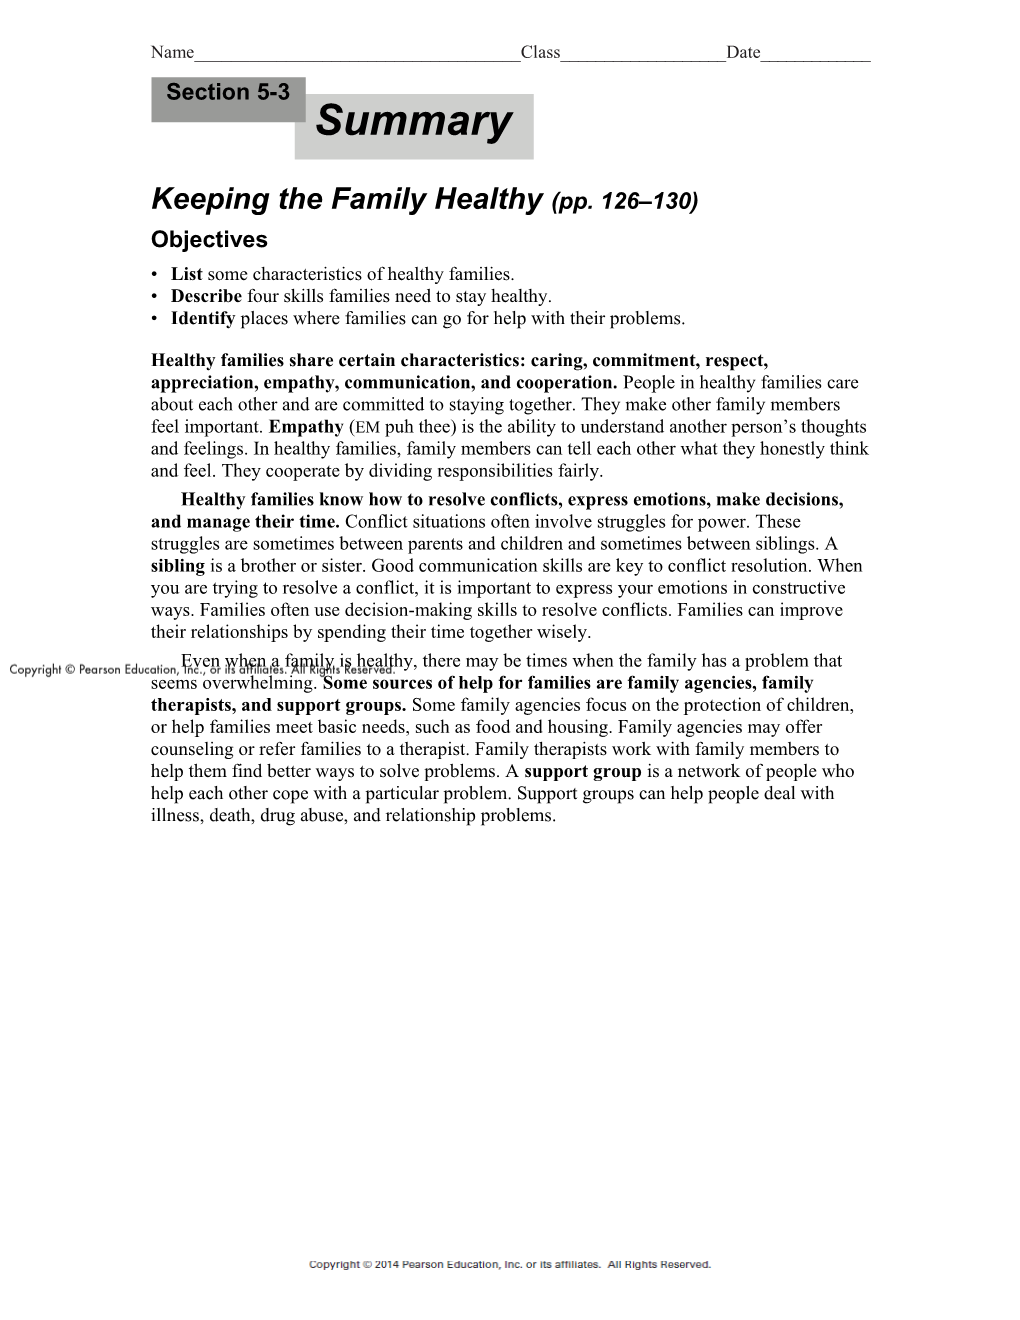 List Some Characteristics of Healthy Families